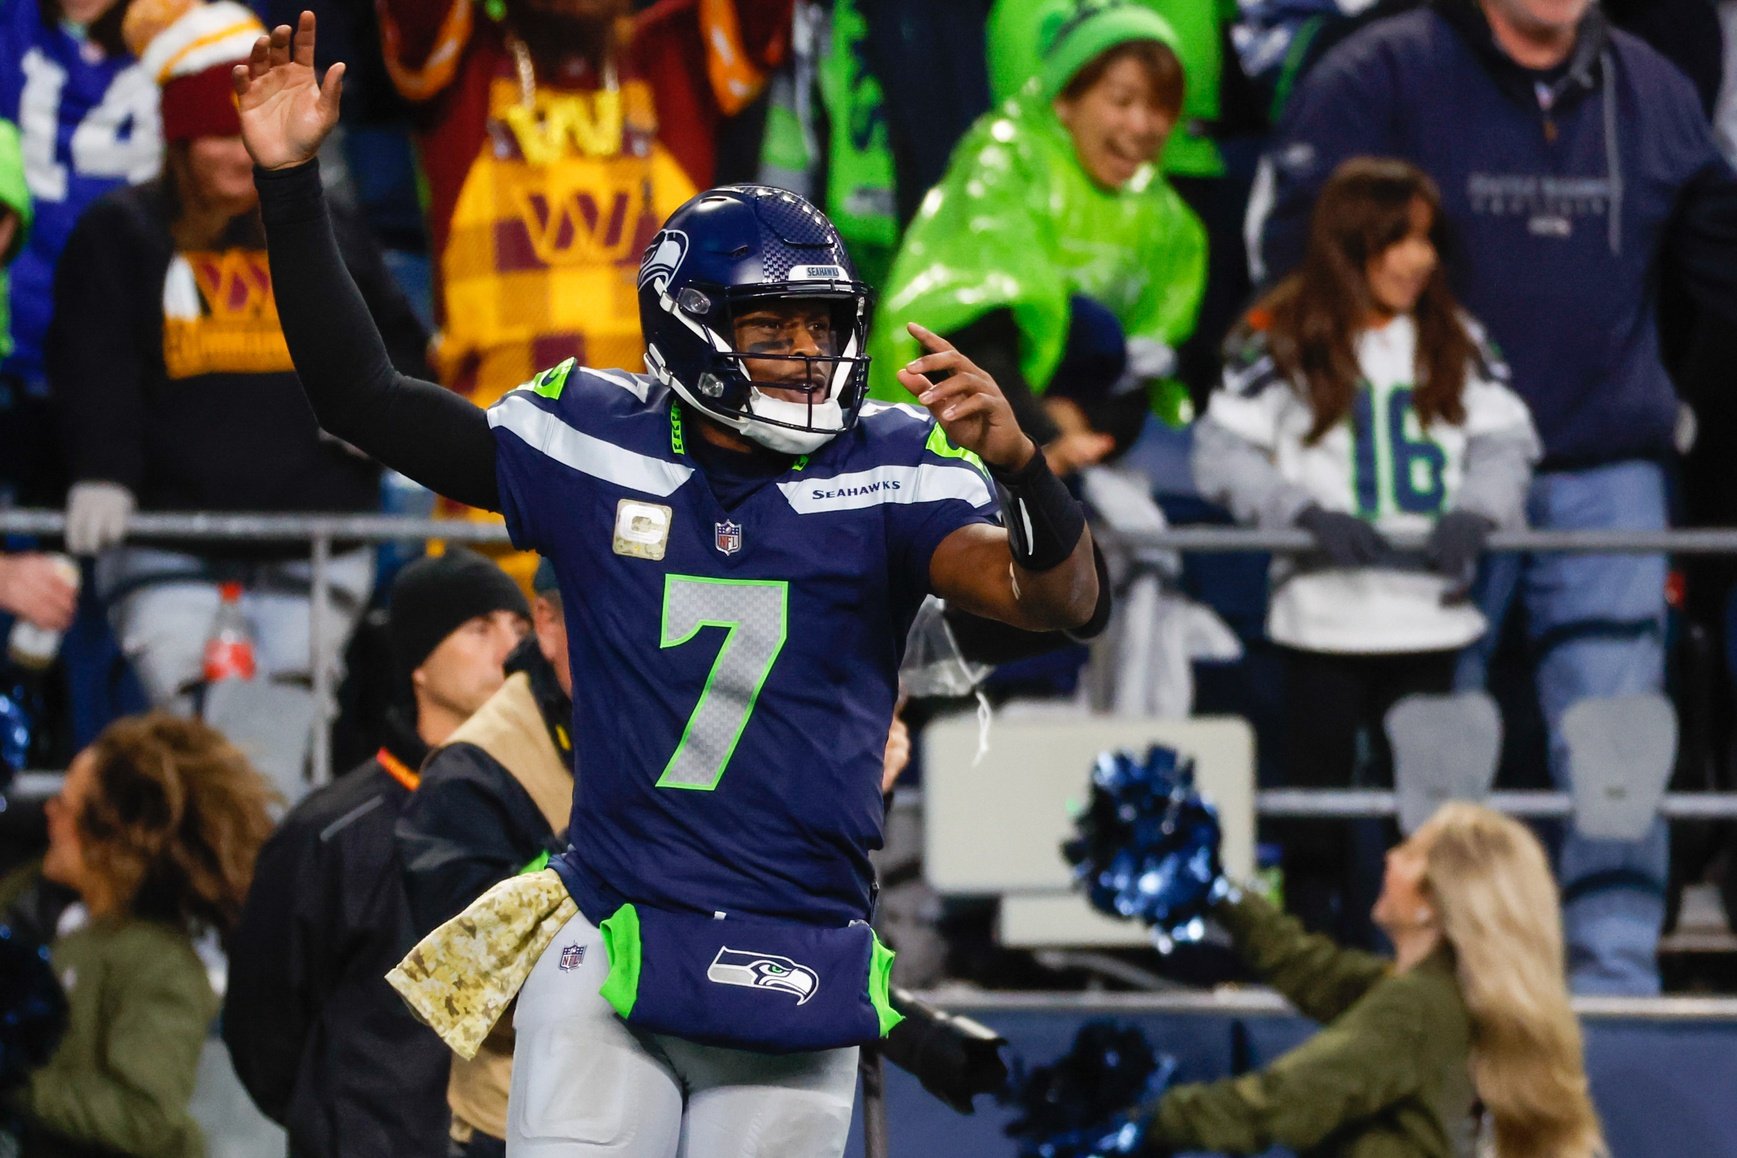 Seattle Seahawks quarterback Geno Smith (7) celebrates after throwing a touchdown pass against the Washington Commanders during the fourth quarter at Lumen Field.